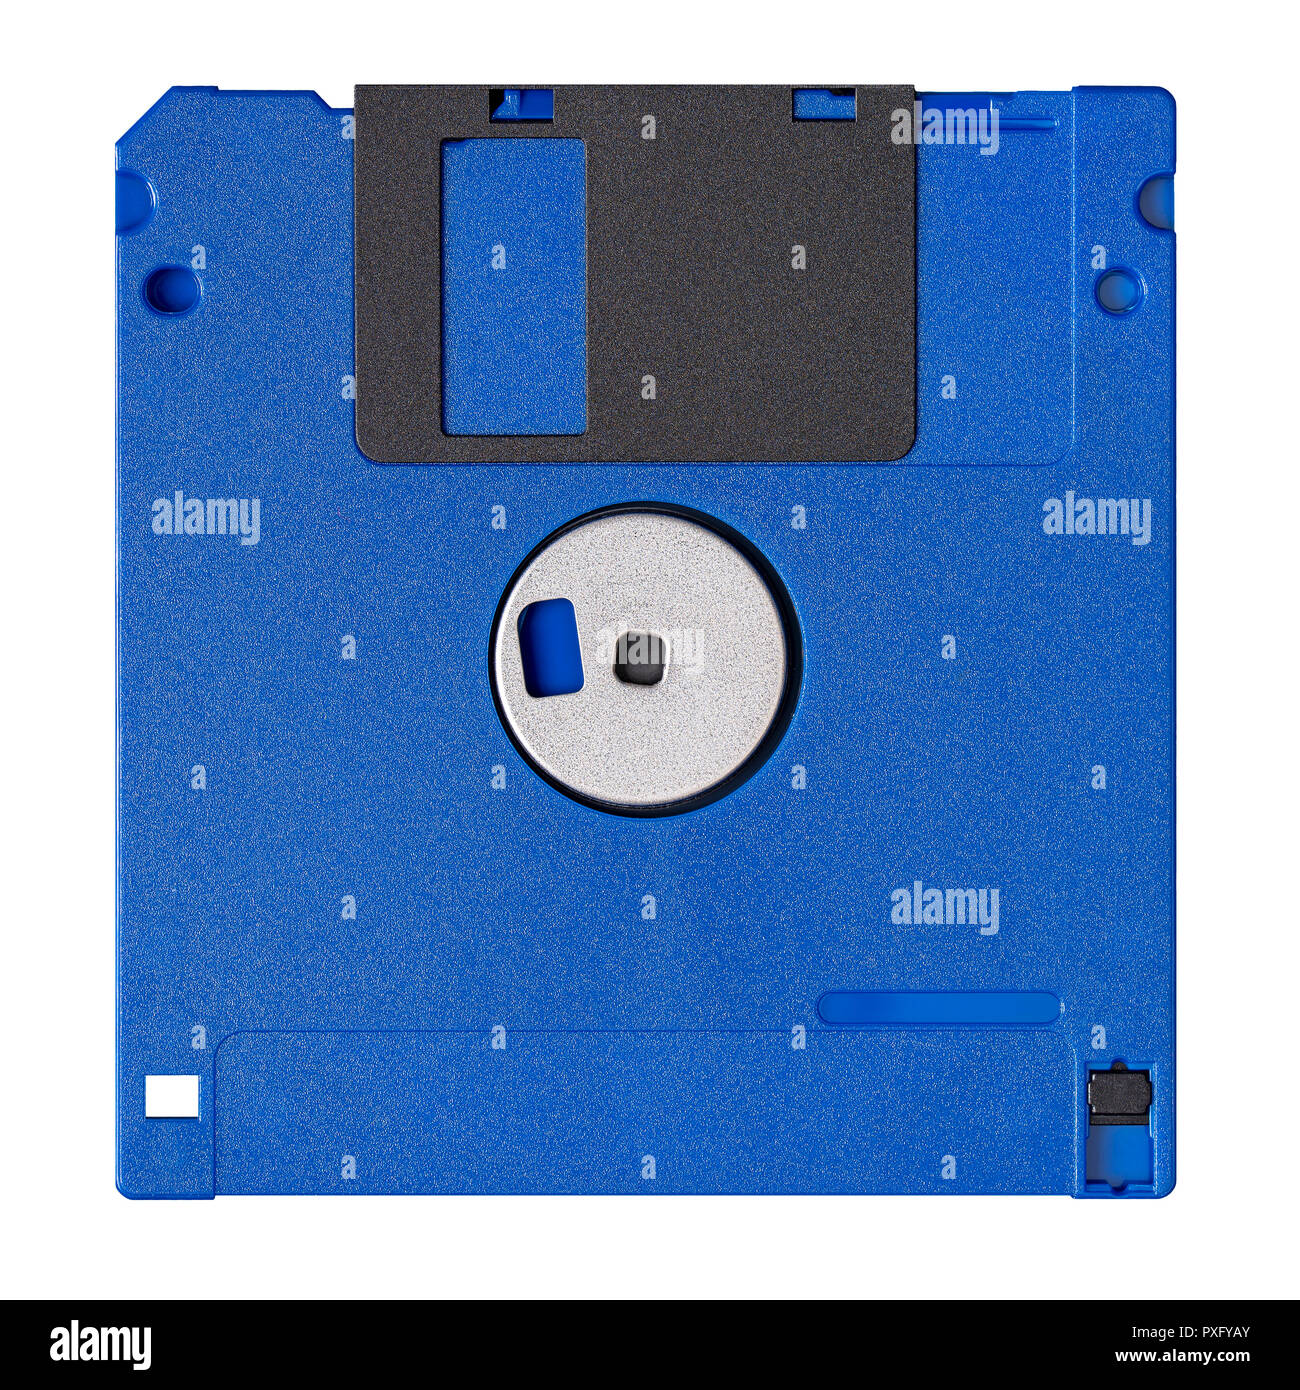 Standard blue floppy disk isolated on white background. Backside view. Stock Photo